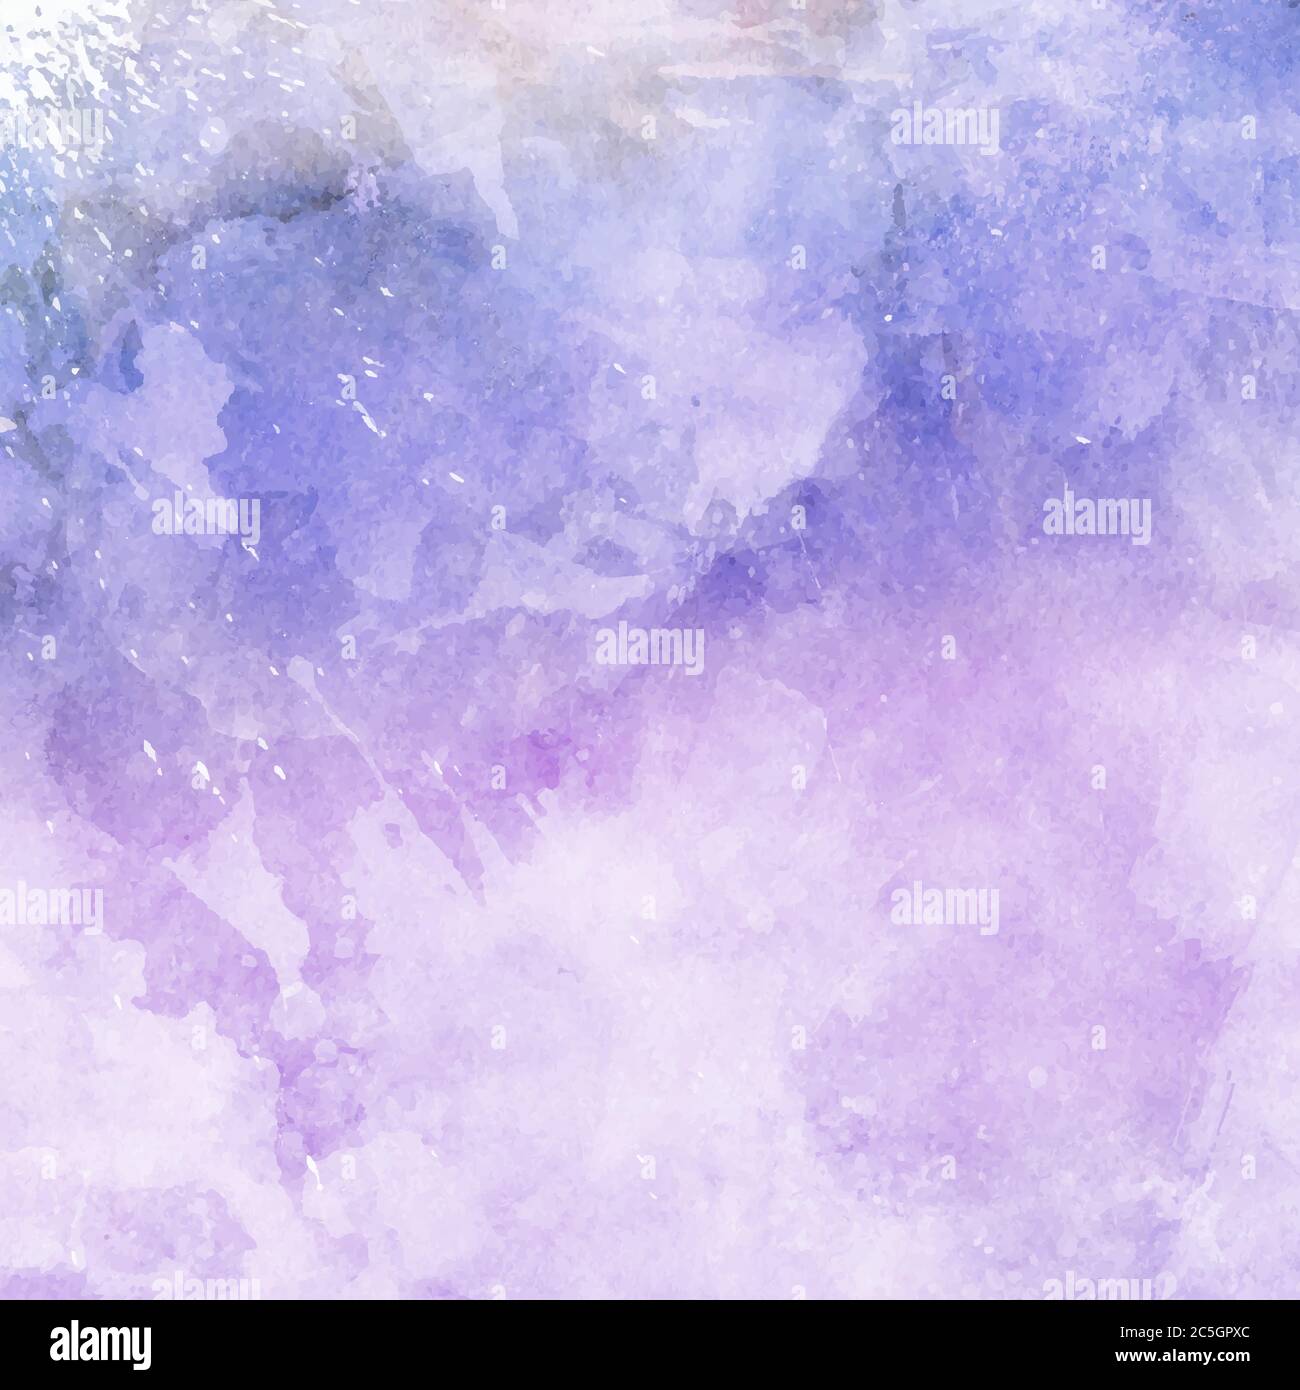 Decorative watercolor background in shades of pink and purple Stock Photo